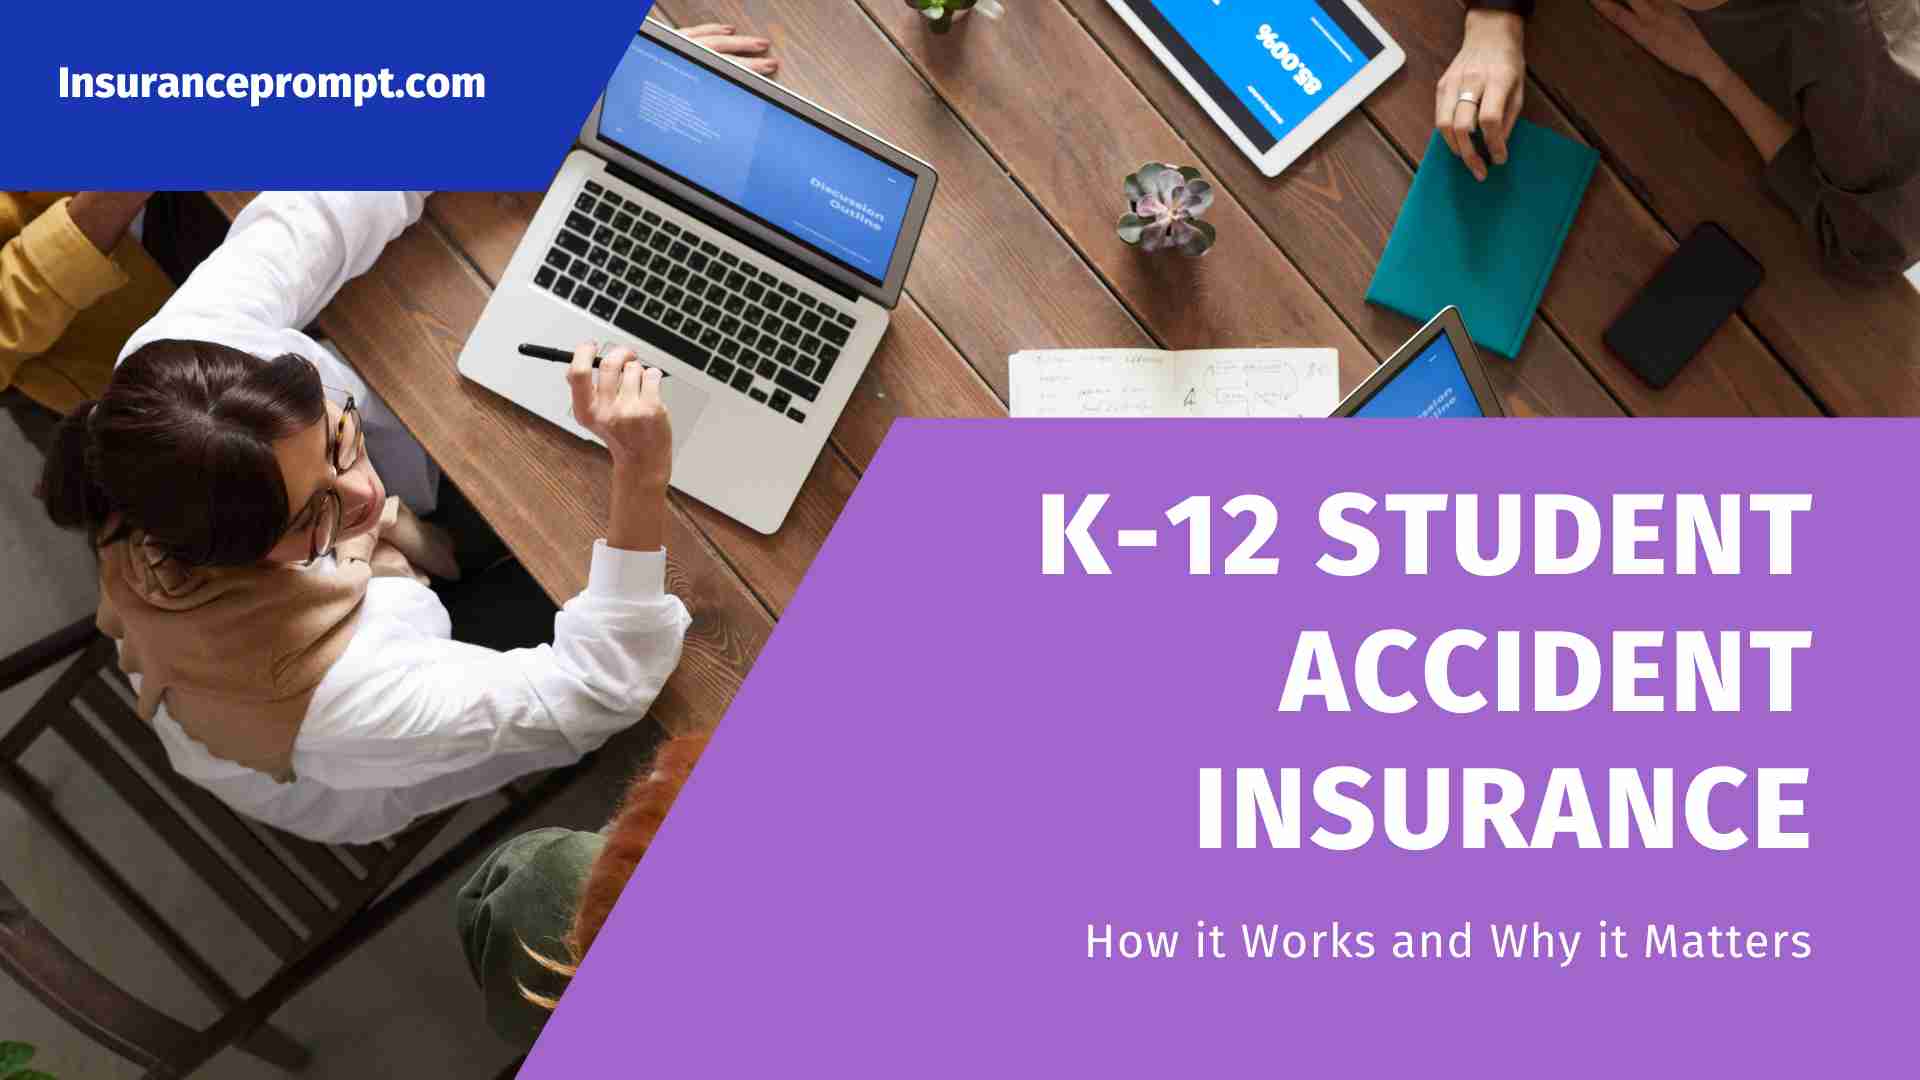 K-12 Student Accident Insurance: How it Works and Why it Matters